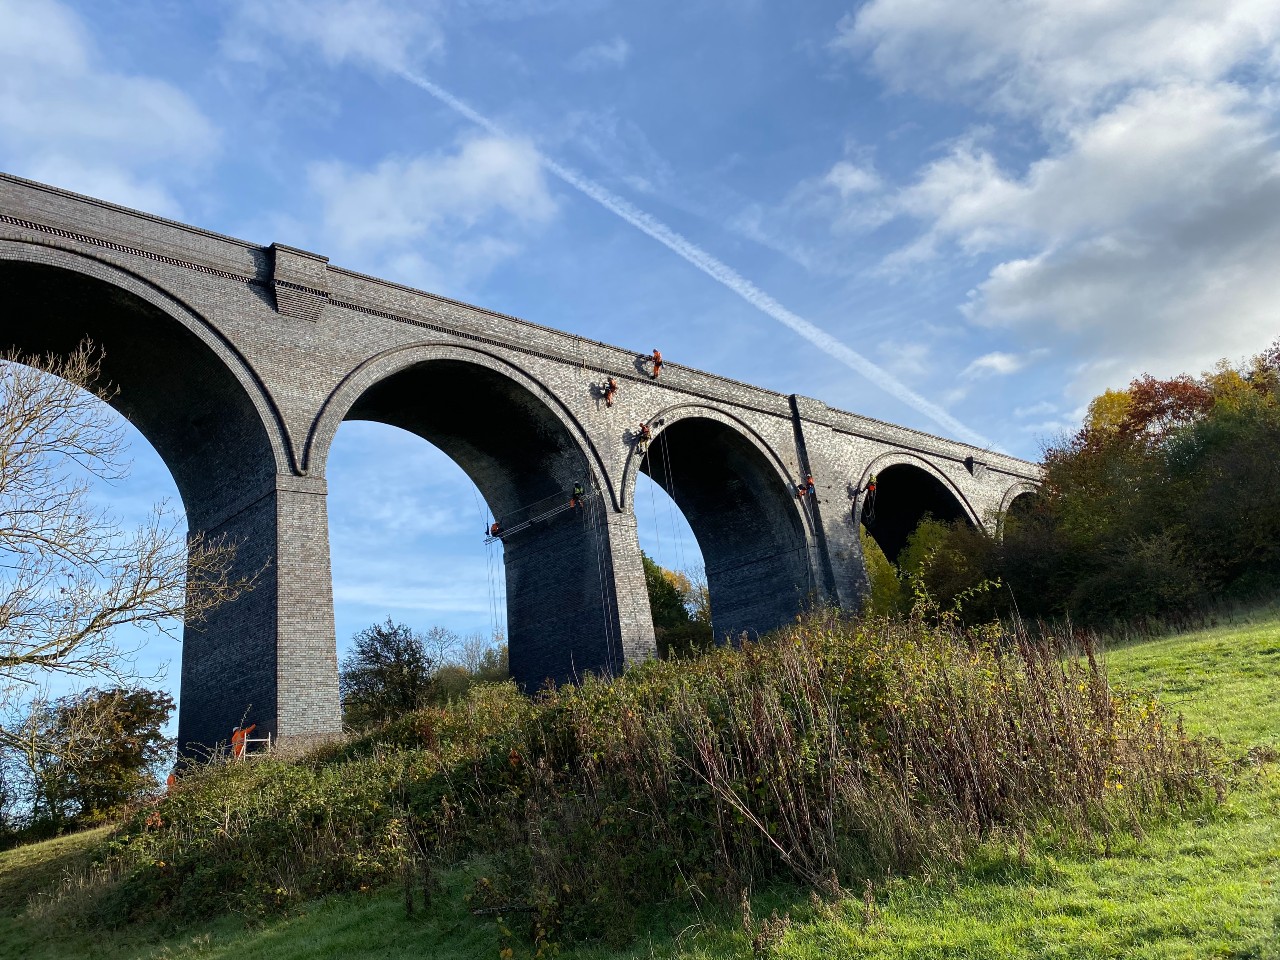 Repointing work on the Crigglestone Viaduct